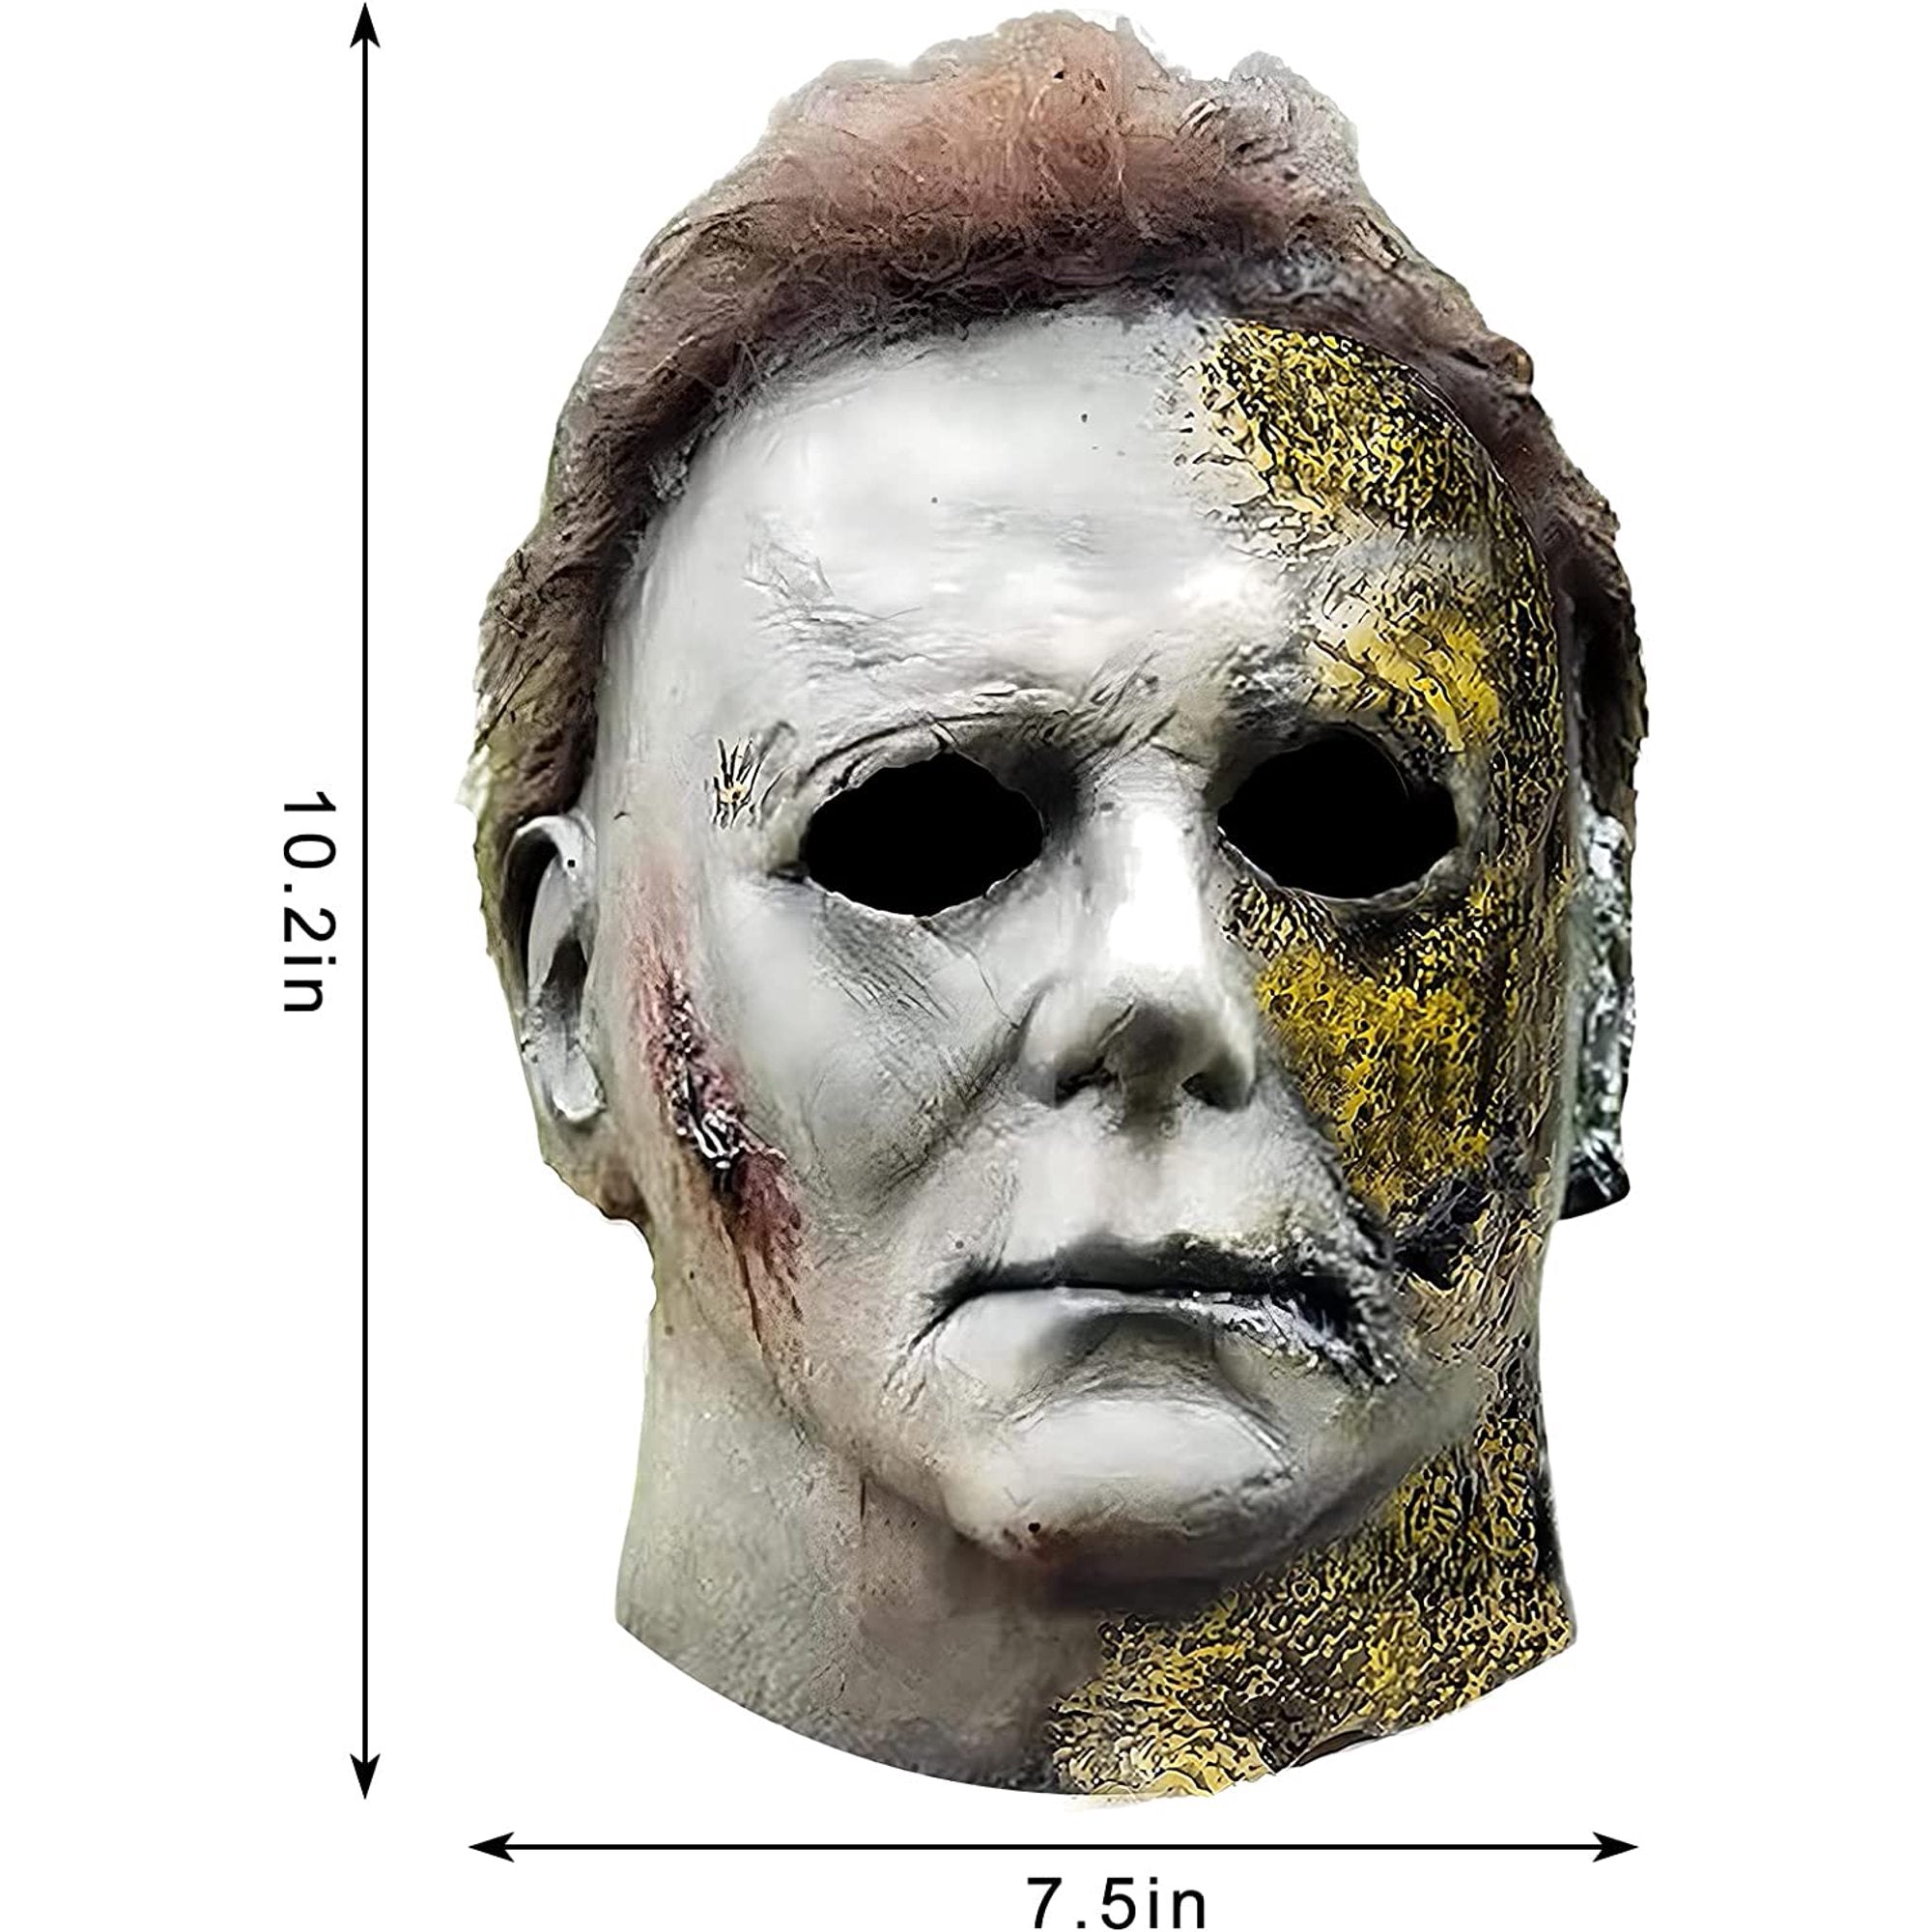 Melliful Halloween Horror Mask, Scary Michael Myers Murderer Mask, Full Face Latex Mask for Halloween Cosplay Costume Party